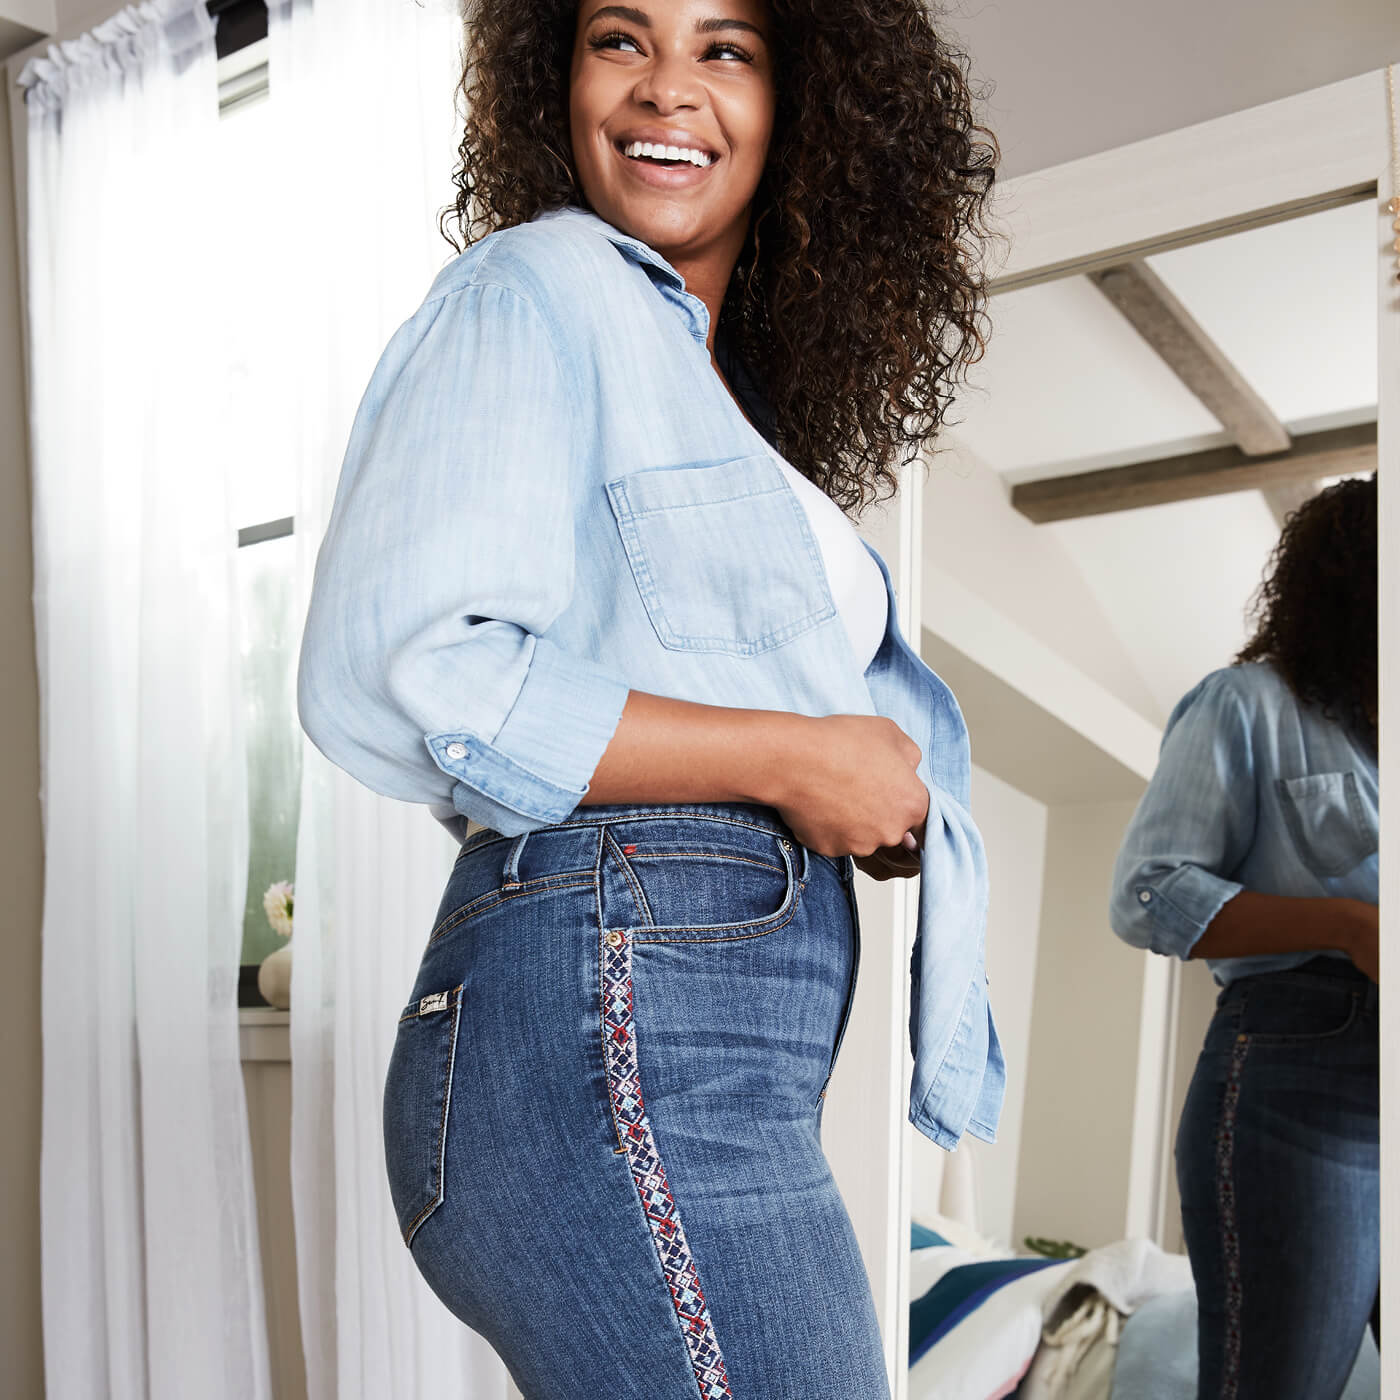 The Best Jeans for Curves, According to a Plus Sized Model